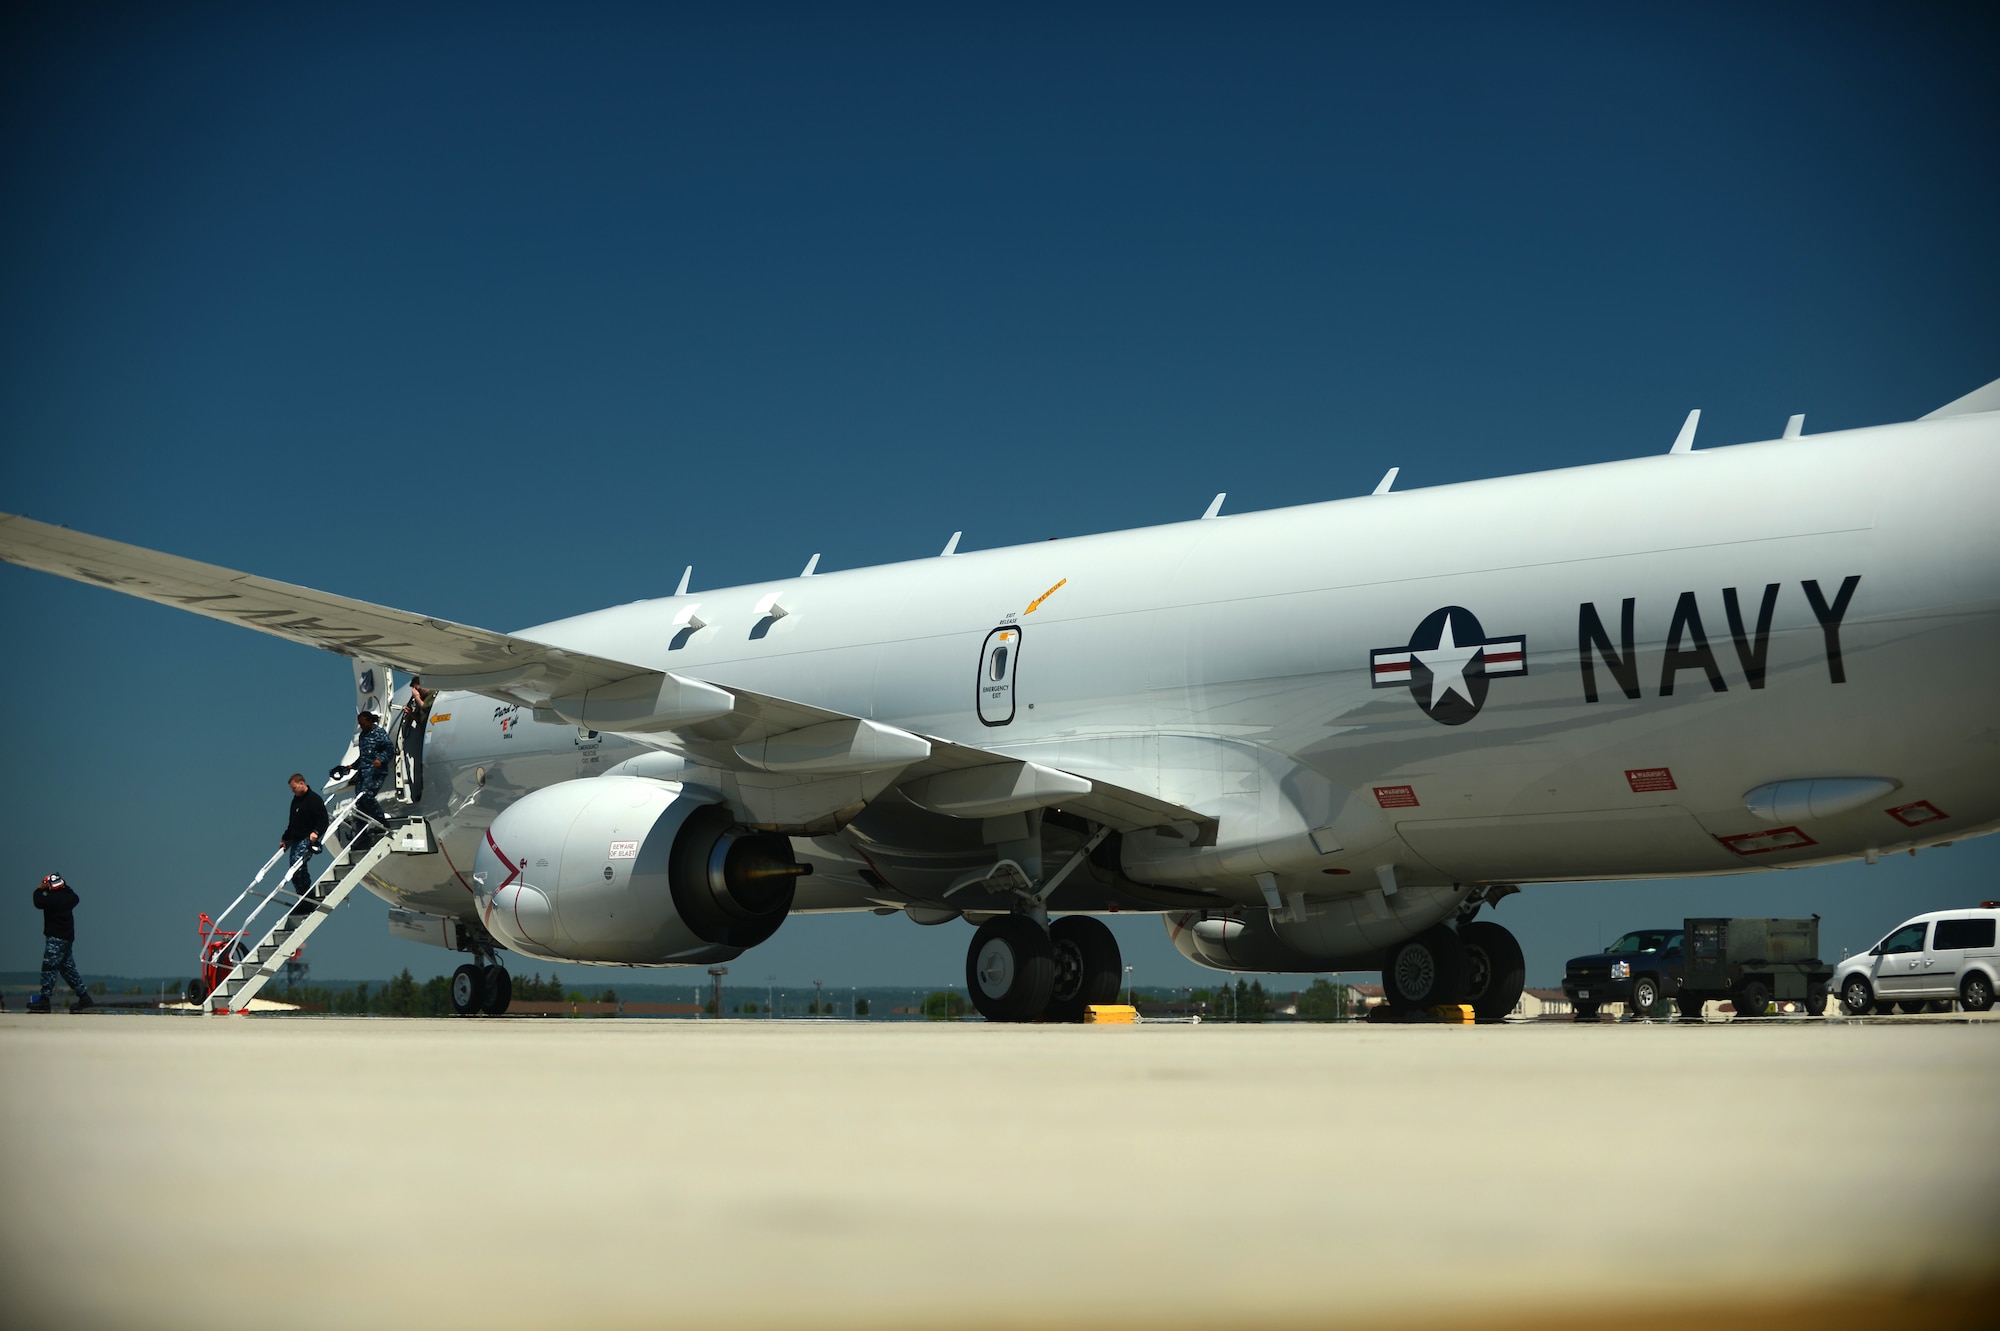 Members of the U.S. Navy de-board a Boeing P-8 Poseidon that arrived on the flightline of Spangdahlem Air Base, Germany, June 5, 2015. The aircraft, which departed from Naval Air Station Jacksonville, Fla., is in Europe to participate in BALTOPS 2015, an annual allied interoperability exercise that will allow ground, maritime and air forces from participating nations to demonstrate air defense, maritime interdiction, anti-subsurface warfare, mine countermeasures, and amphibious operations in a joint environment to ensure regional security. (U.S. Air Force photo by Senior Airman Gustavo Castillo/Released)